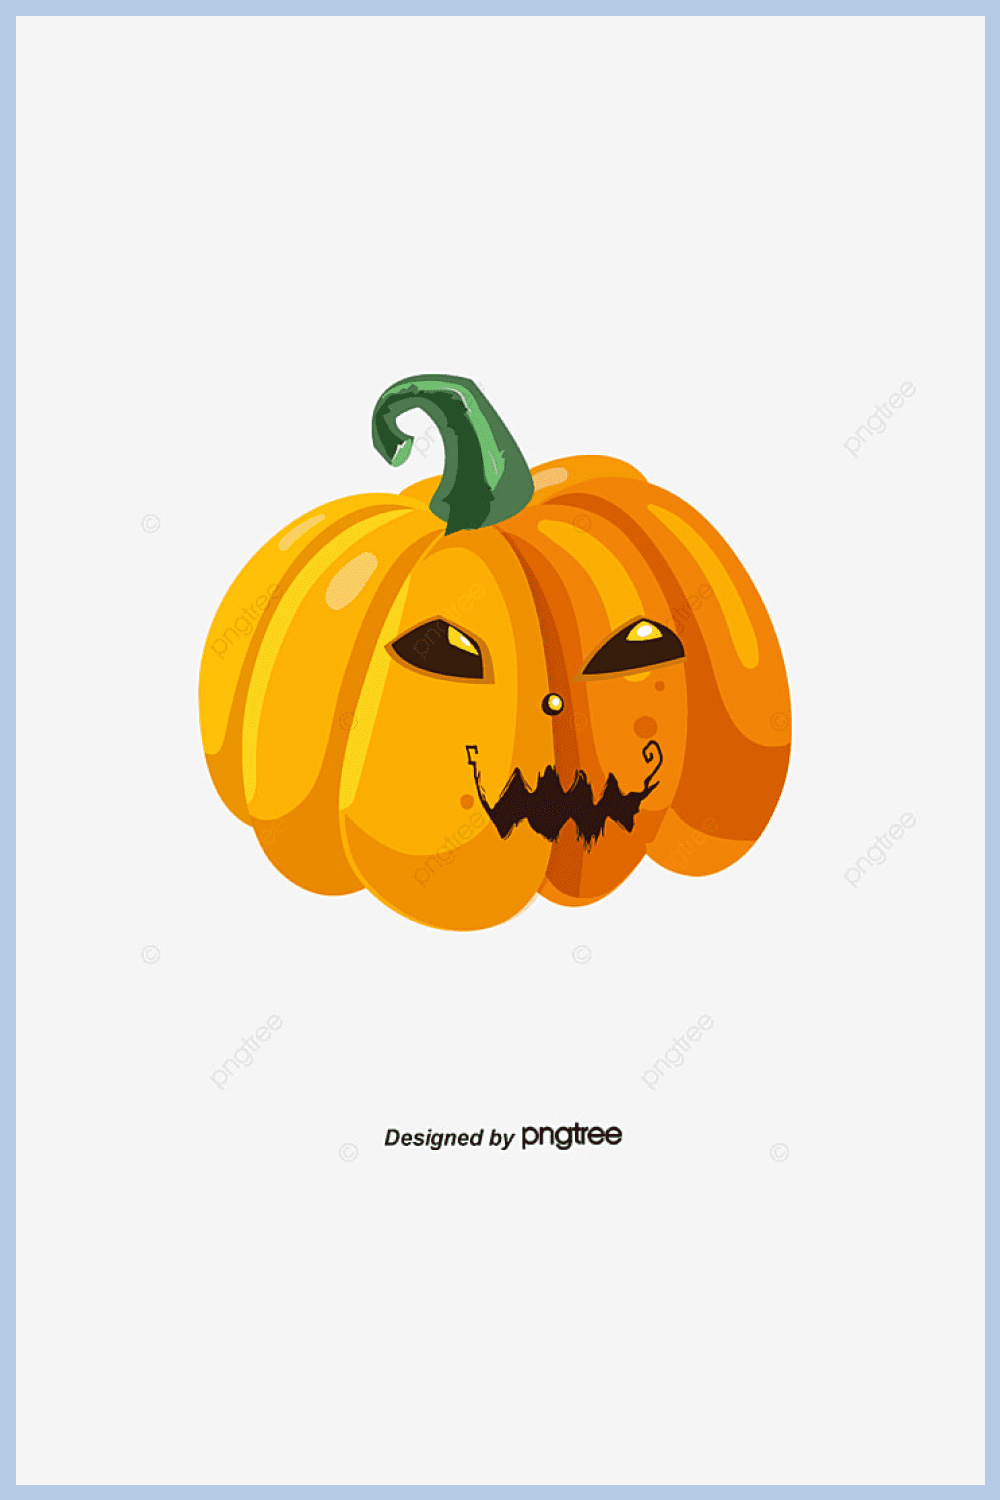 Such a sweet and lonely pumpkin.